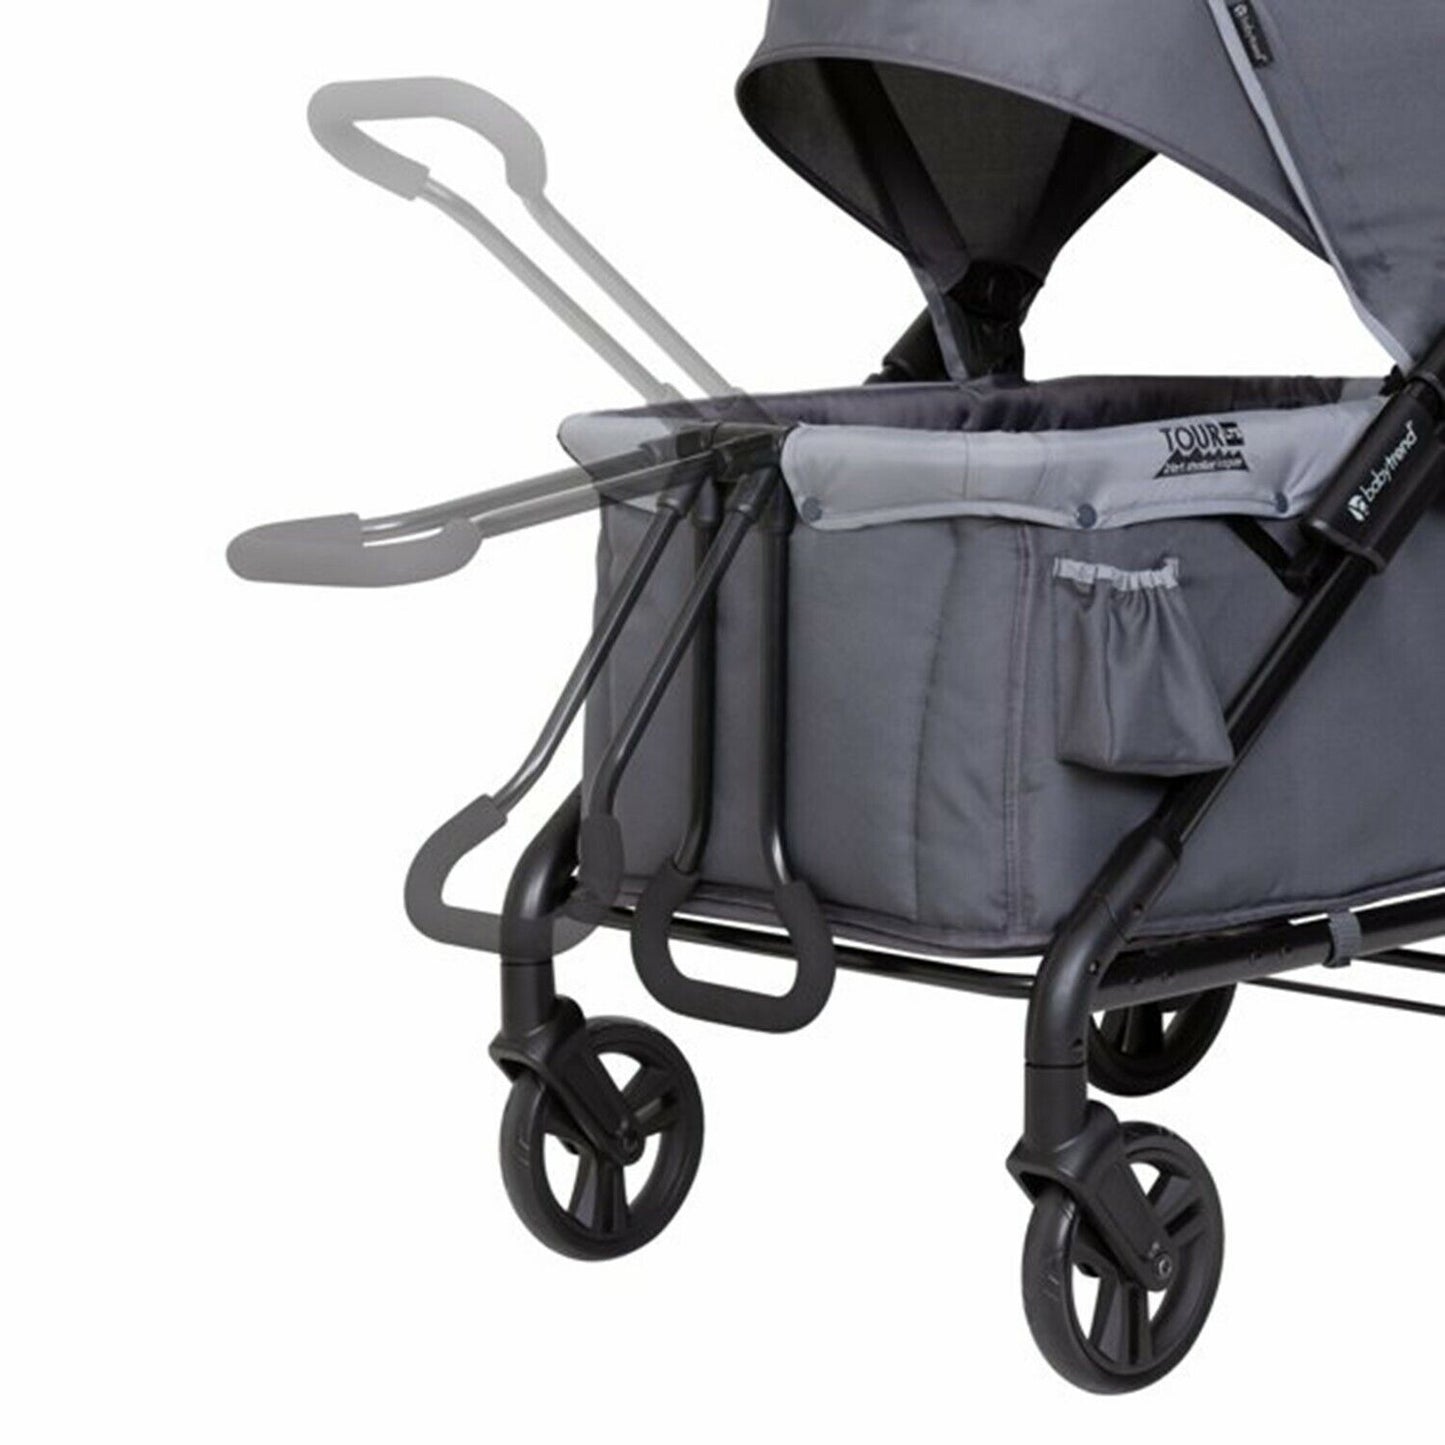 Baby Stroller Wagon with Built-in Seating for 2 Large Cargo Space Push Pull Grey